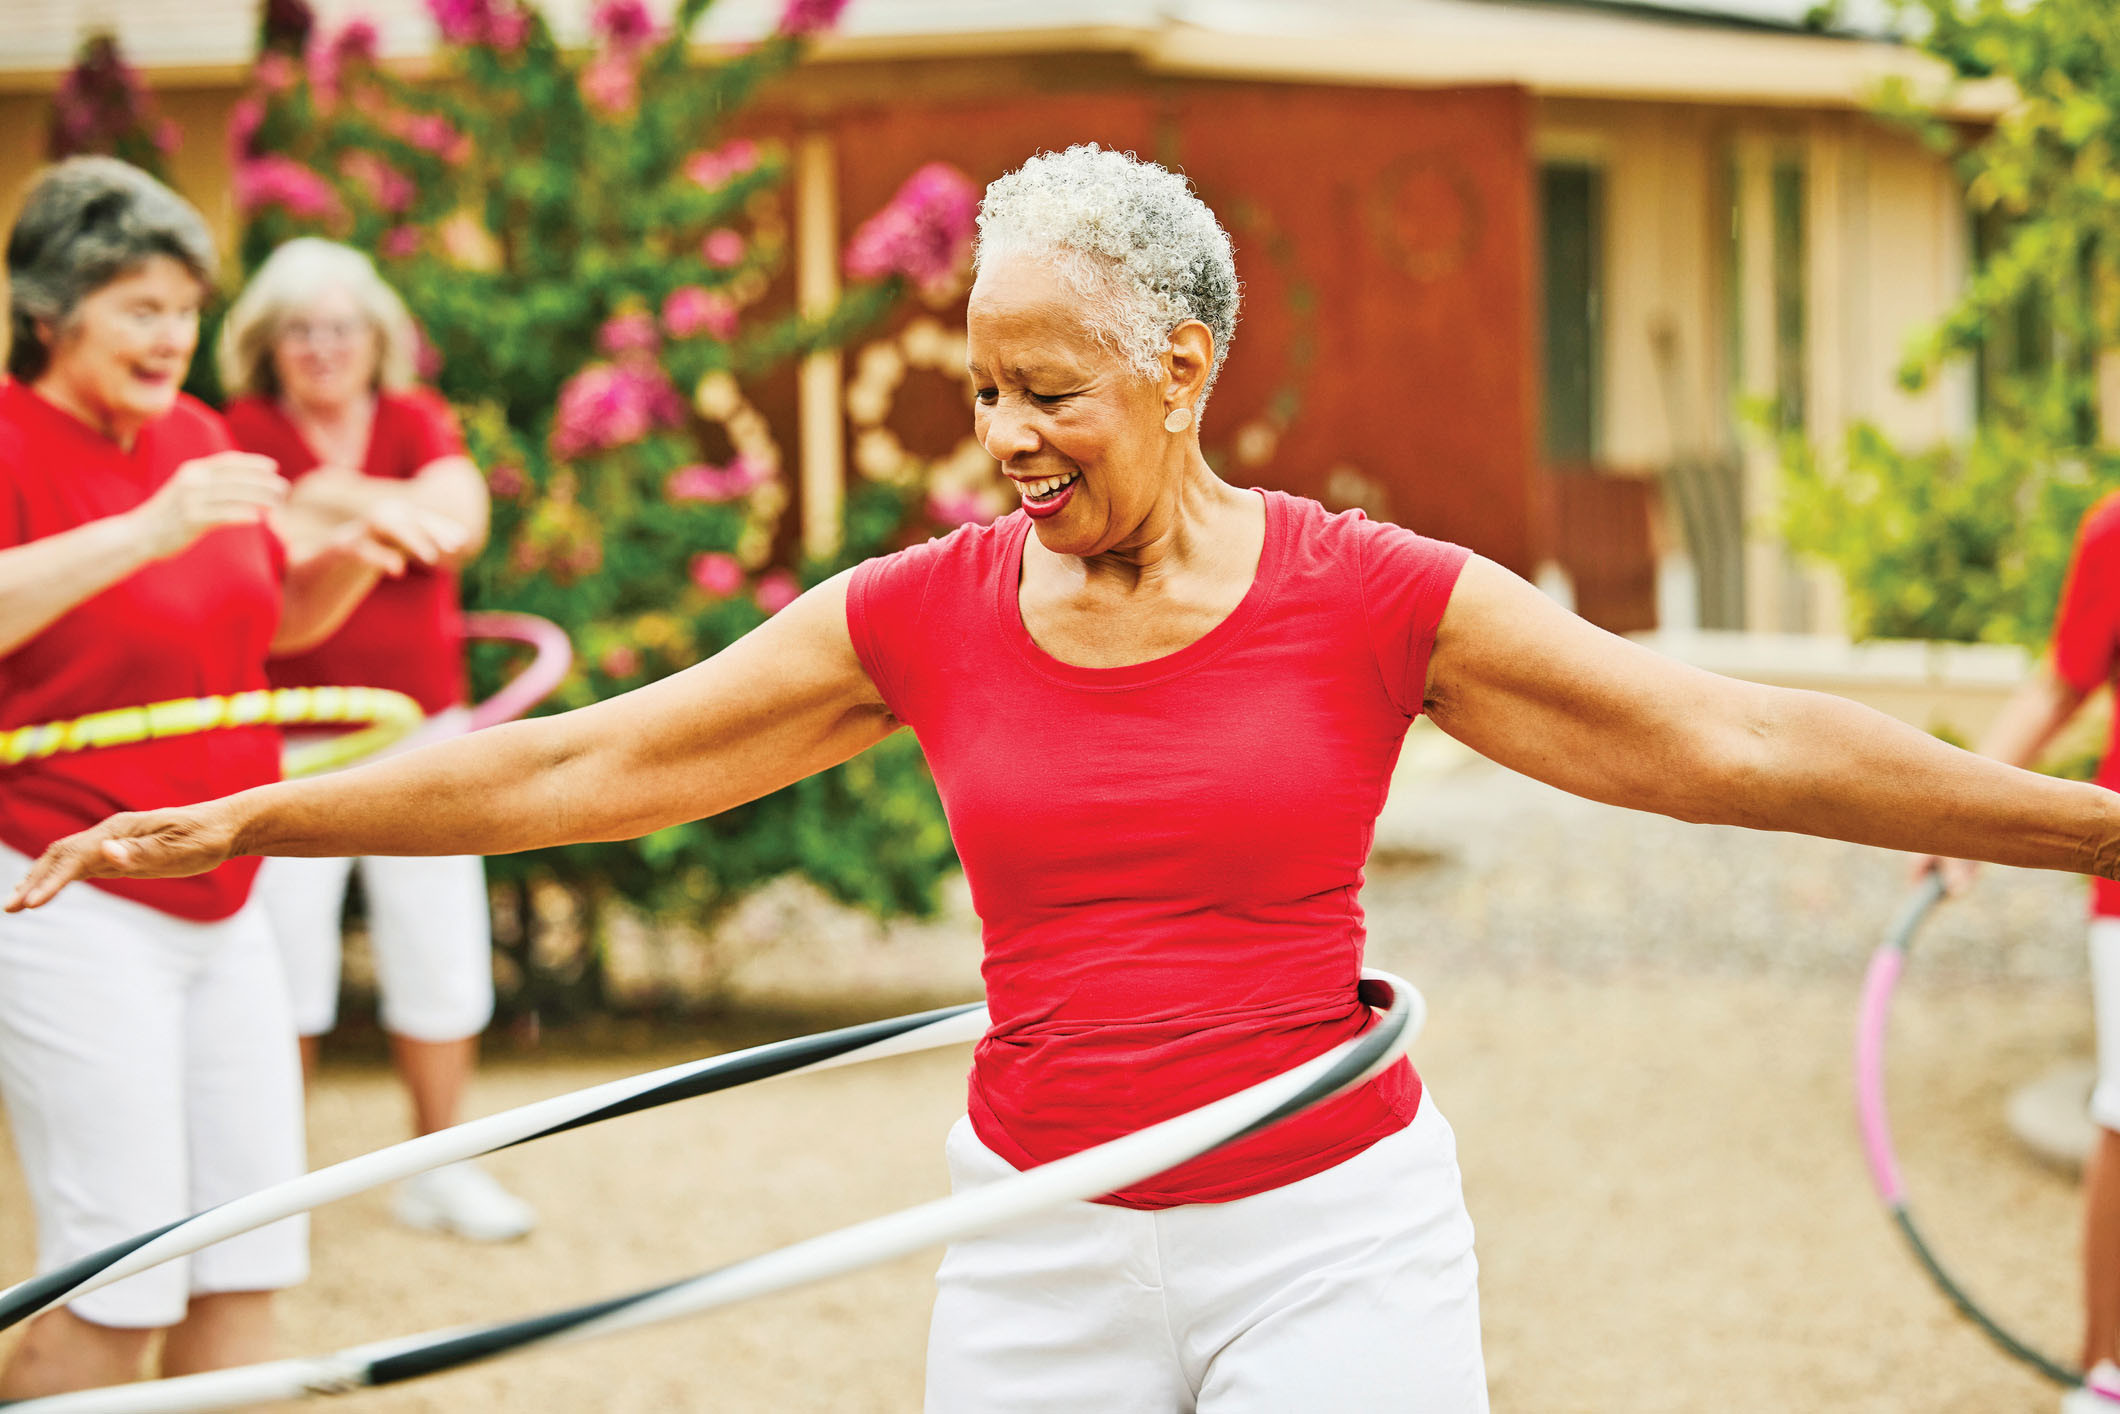 Core Exercise For Seniors (With Resistance Band) — More Life Health -  Seniors Health & Fitness